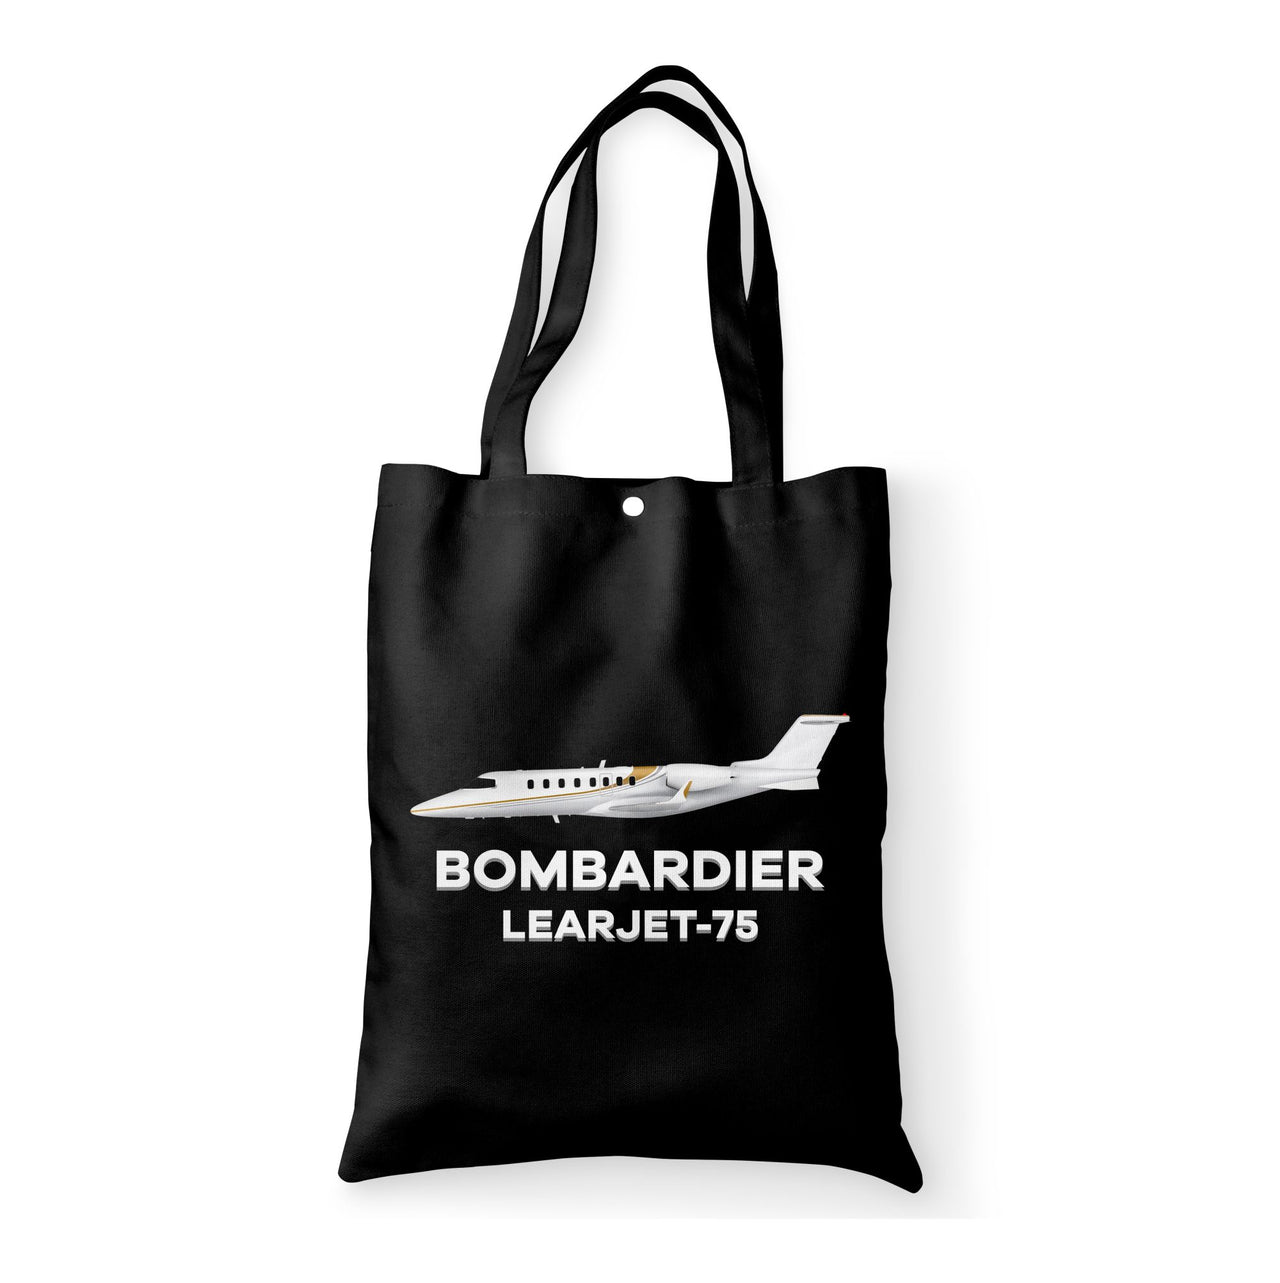 The Bombardier Learjet 75 Designed Tote Bags